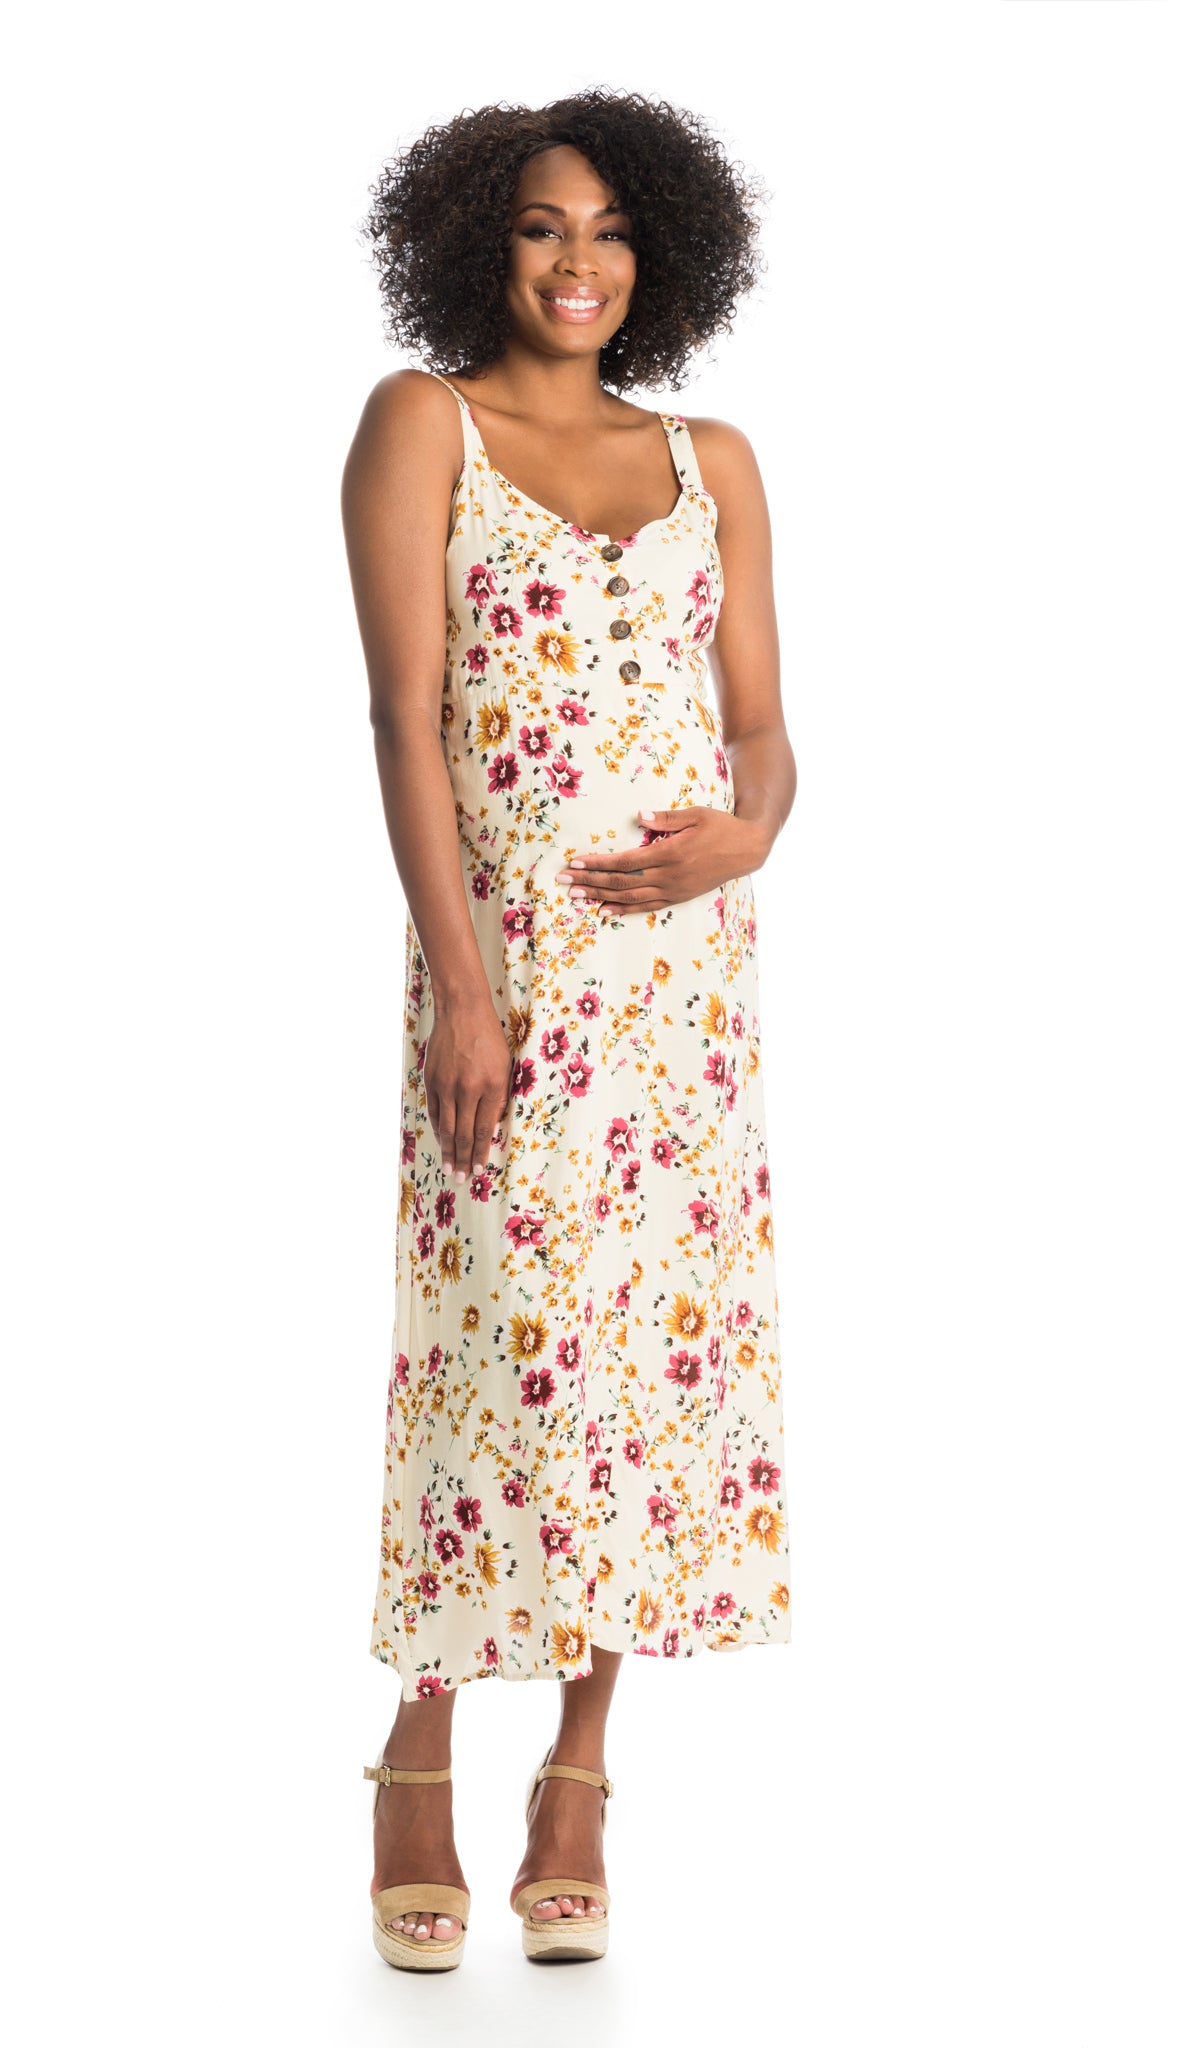 Vintage Floral Savannah dress worn by pregnant woman smiling with one hand on her belly.